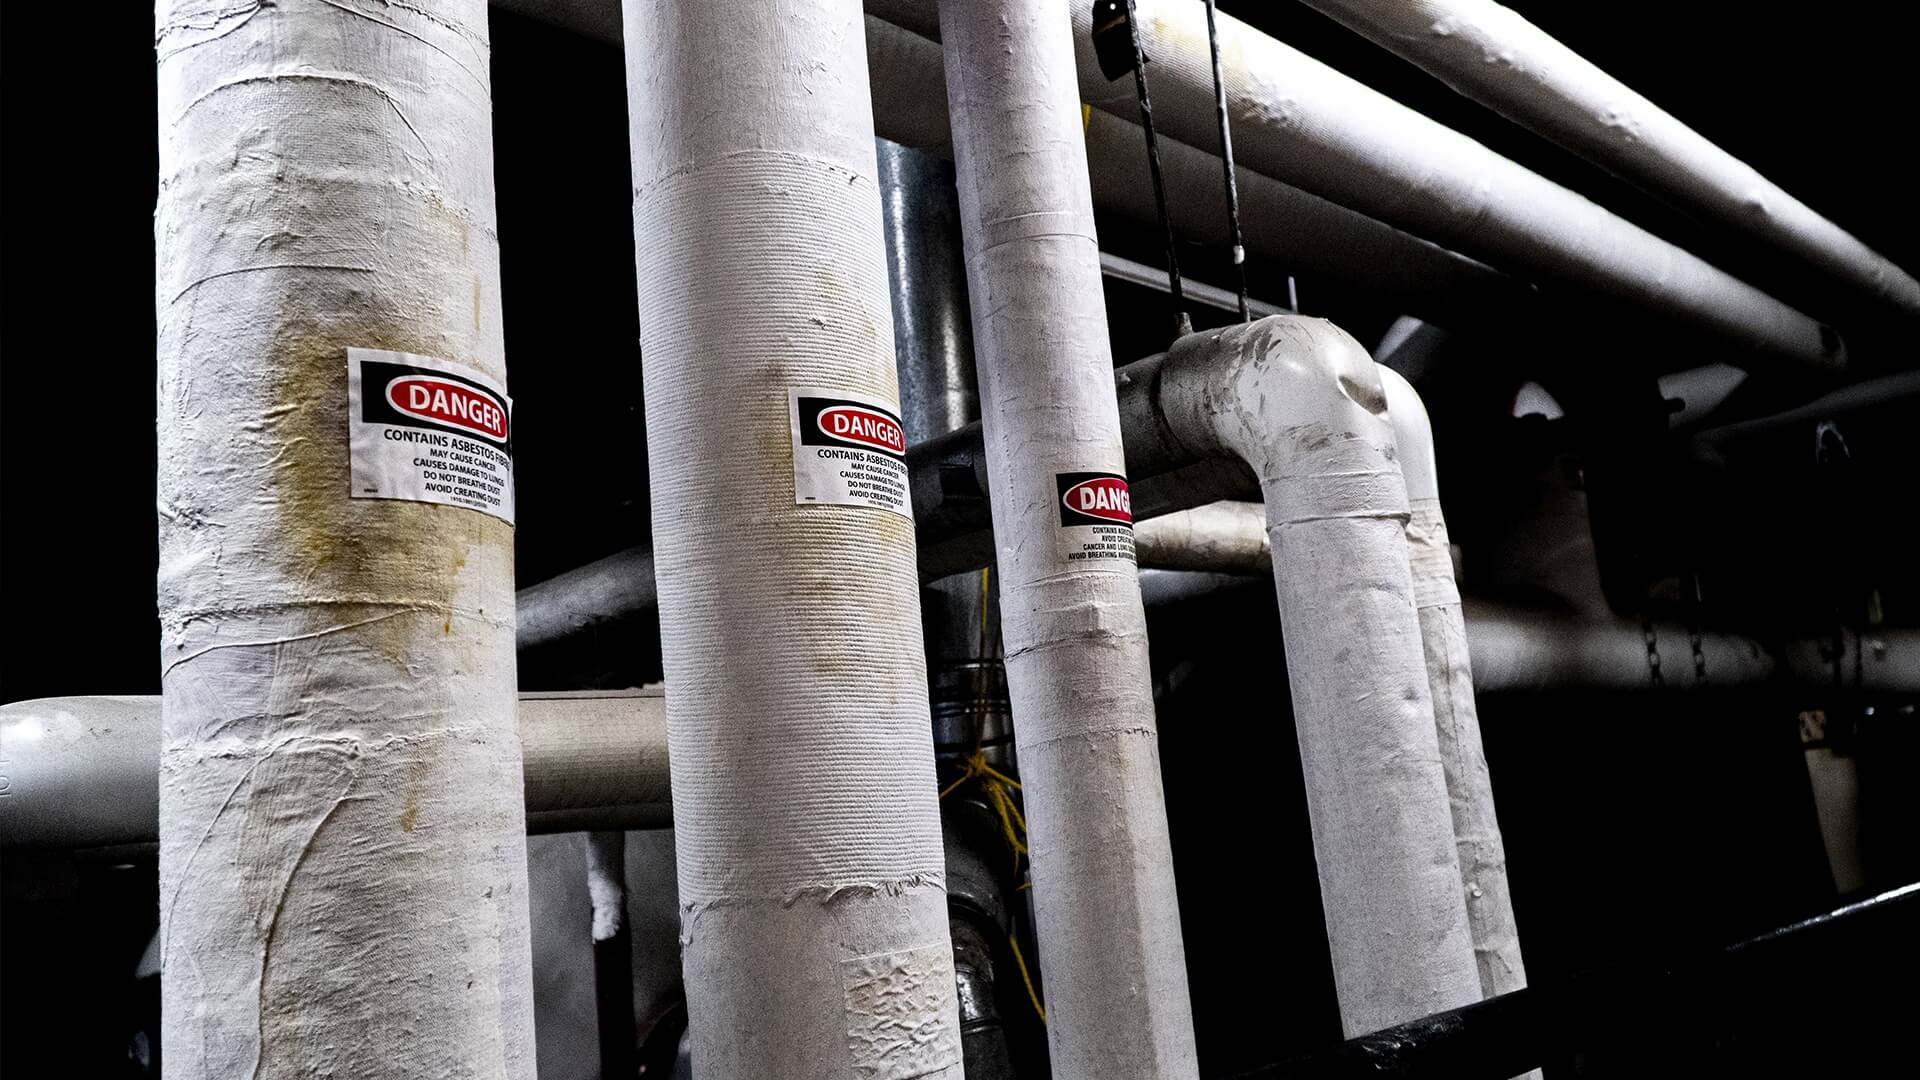 Pipes wrapped with asbestos with danger signs